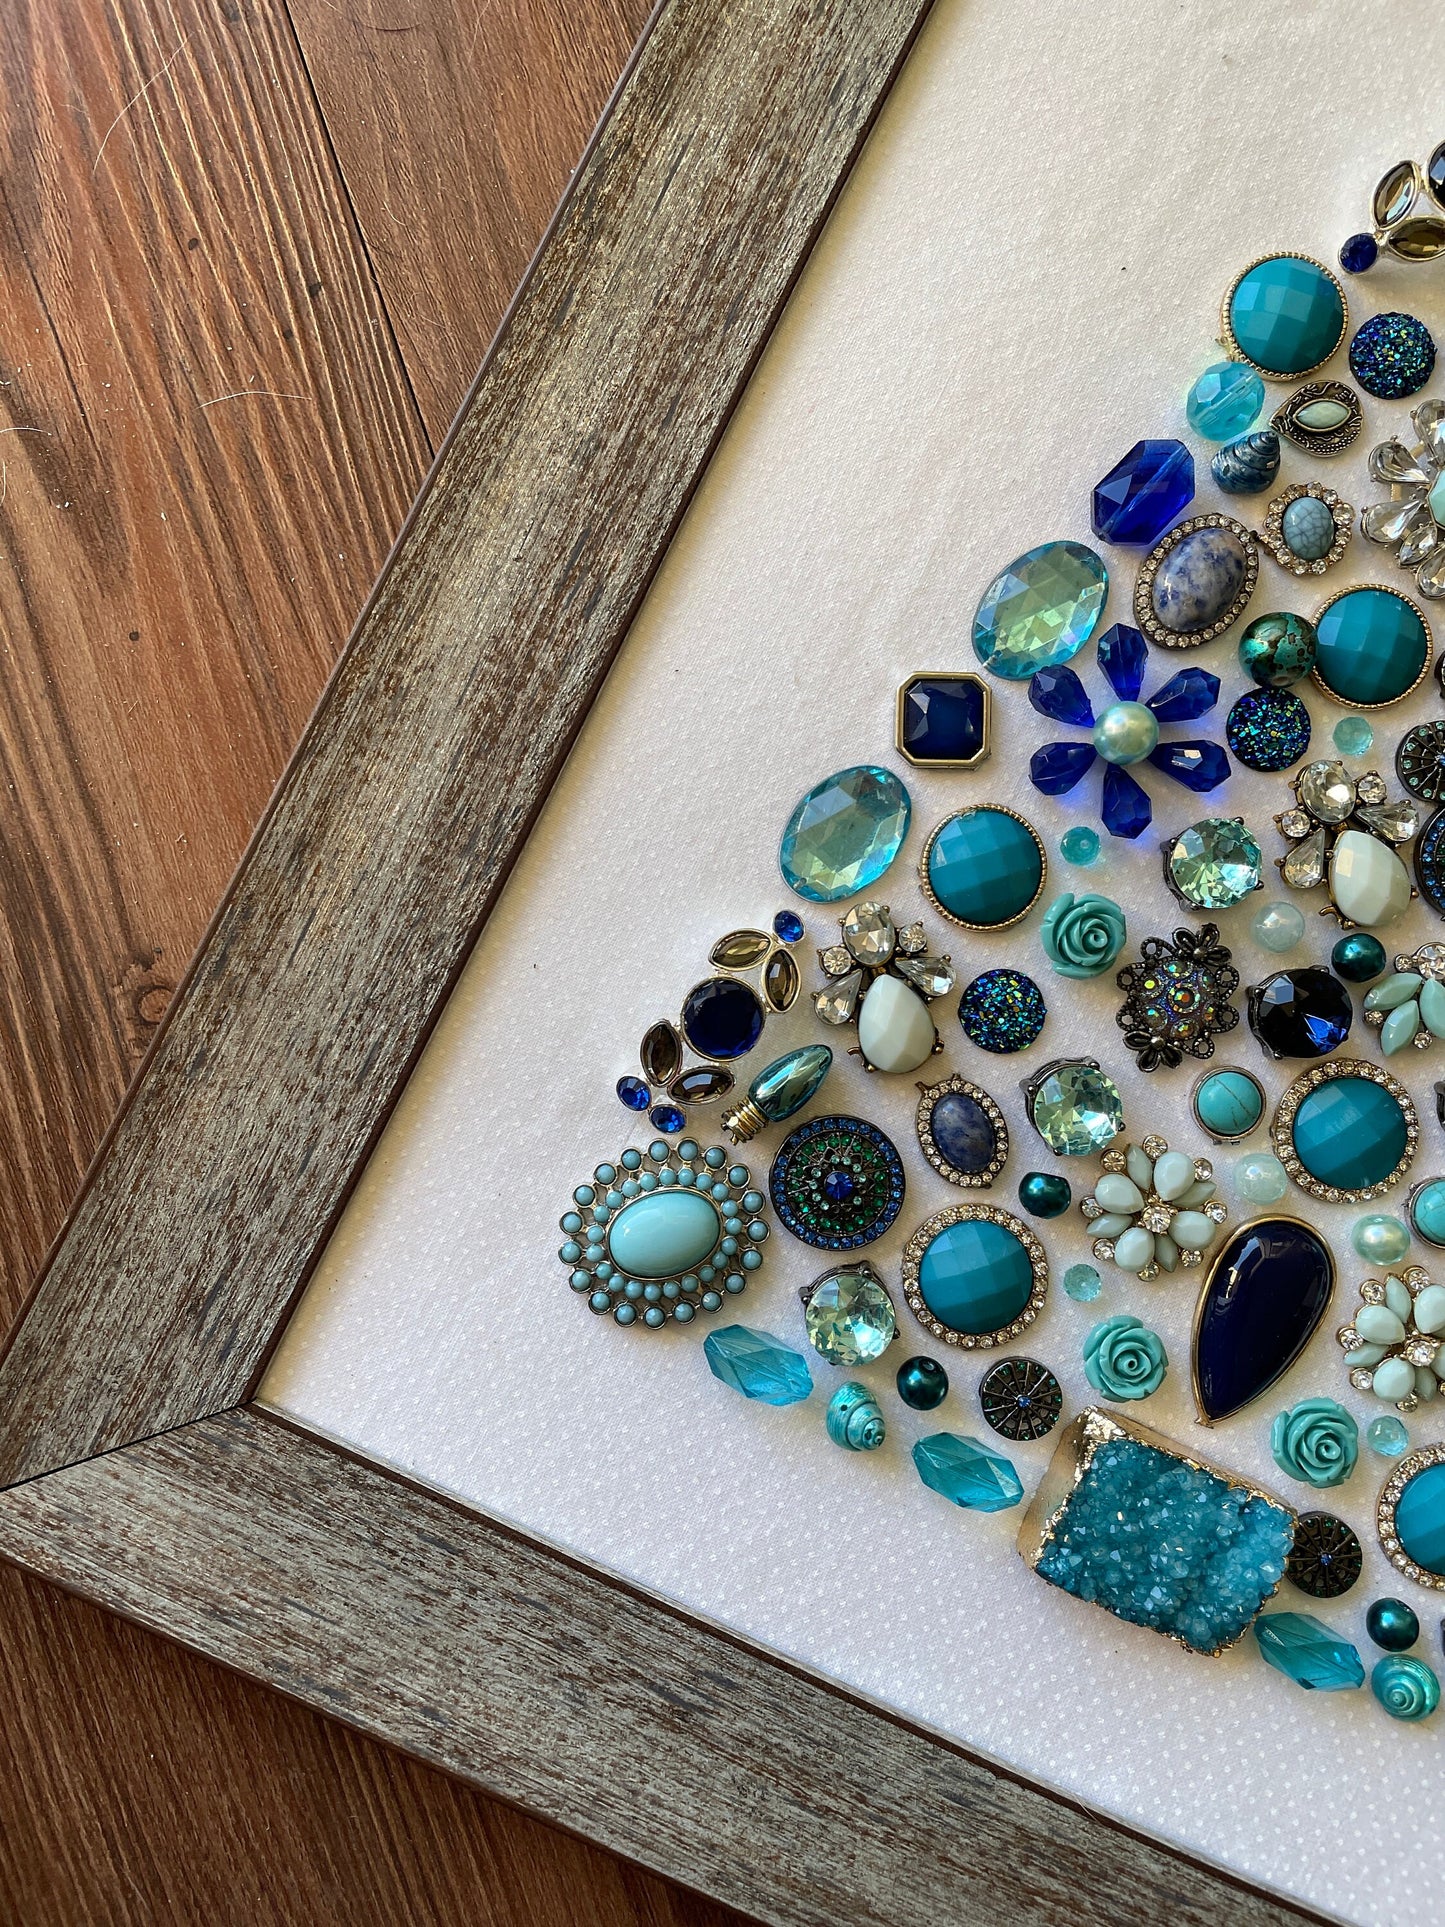 Blue, Silver, and Gray Framed Jewelry Christmas Tree Handmade with Over 60 Pieces of Vintage & Upcycled Jewelry